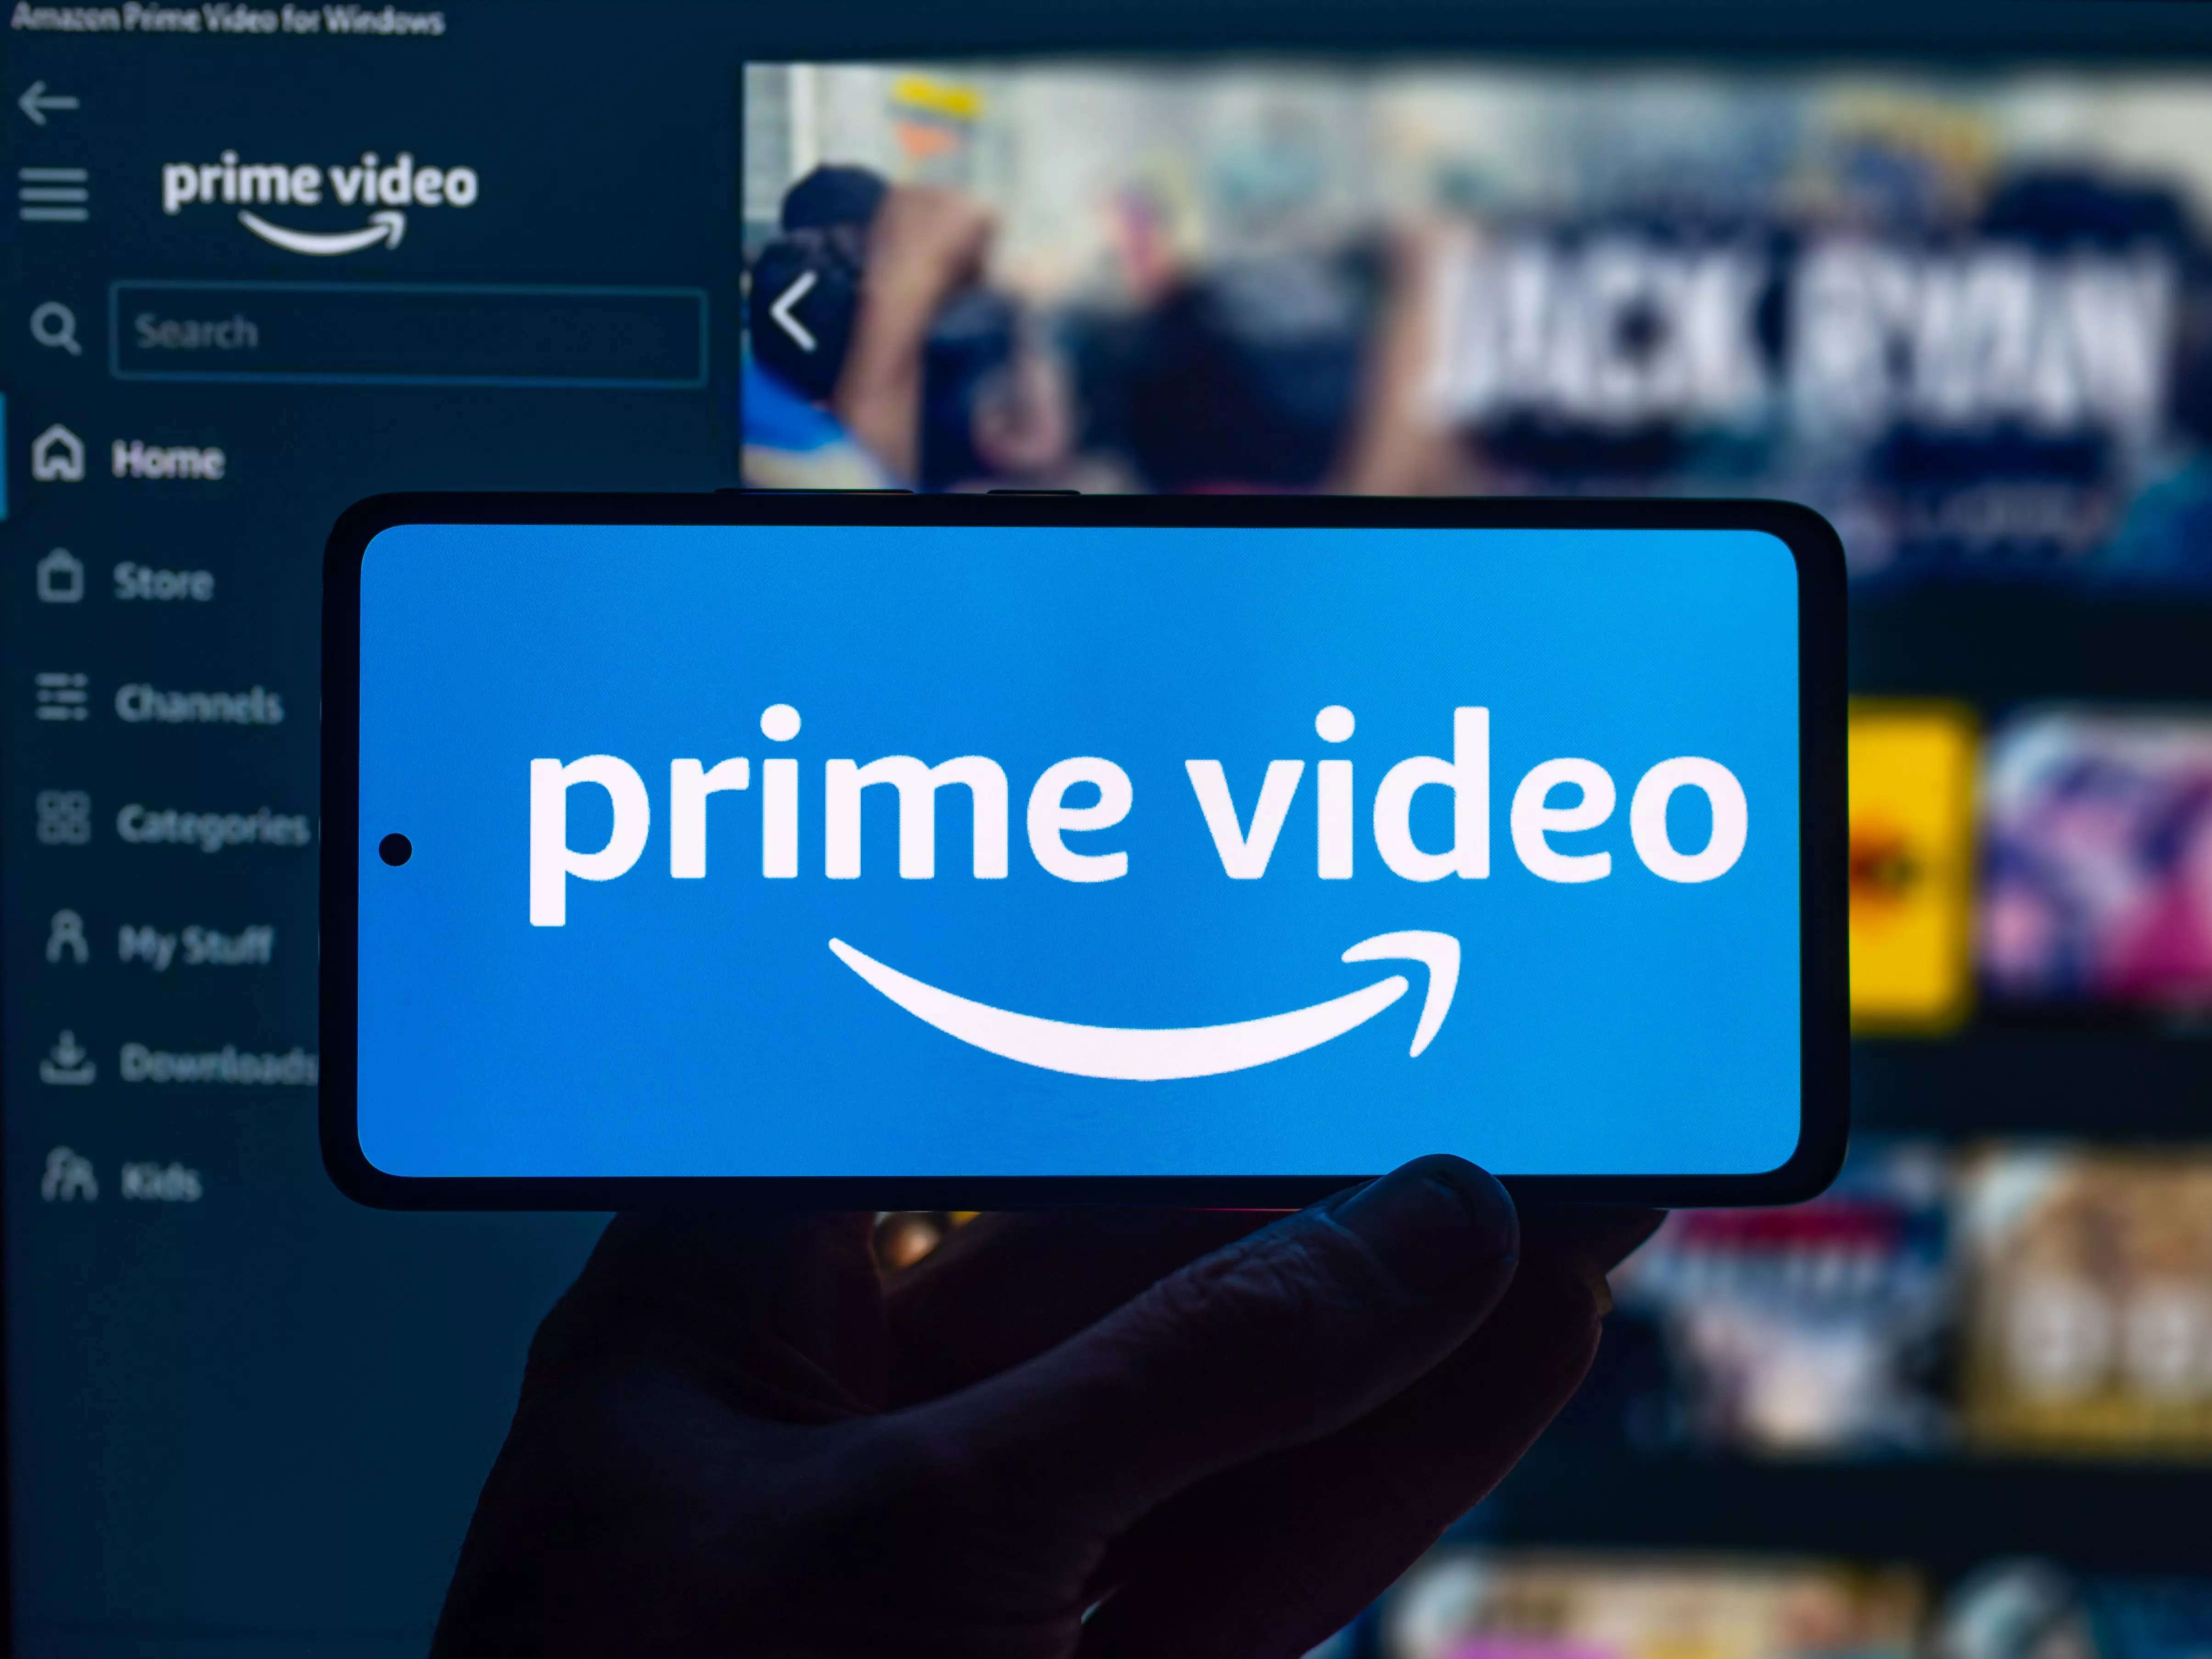 Amazon Prime will now have adverts — until you fork over an additional $2.99 a month